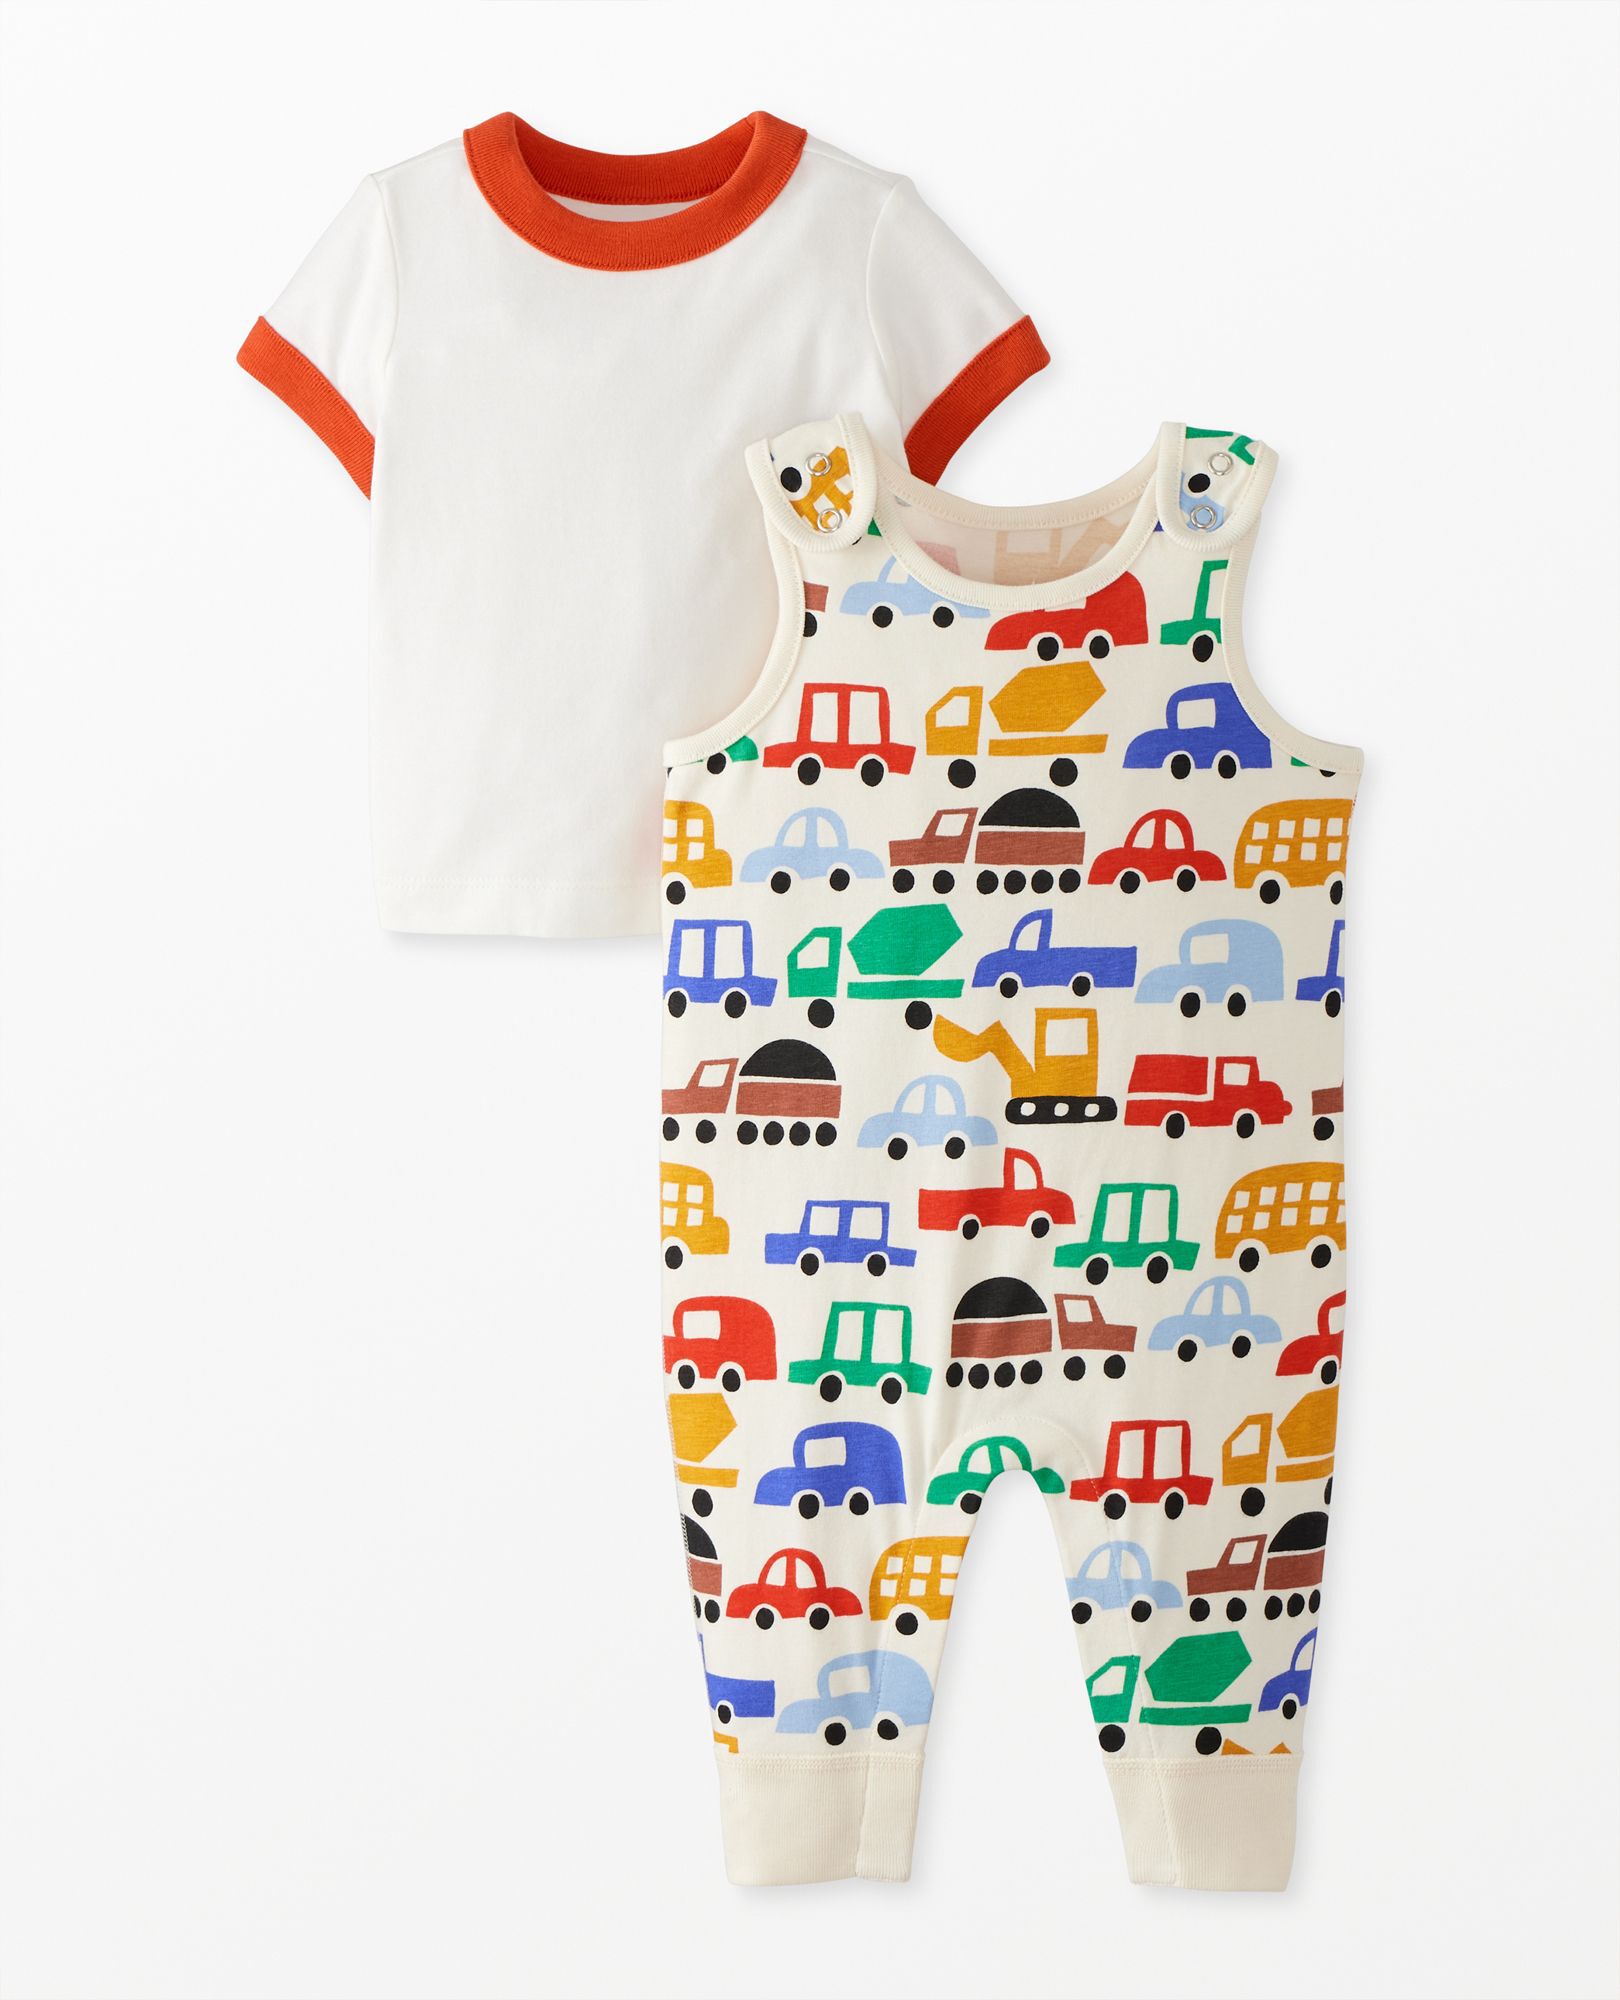 Toddler Boy Pig Nose Print Top And Letter Print Overalls